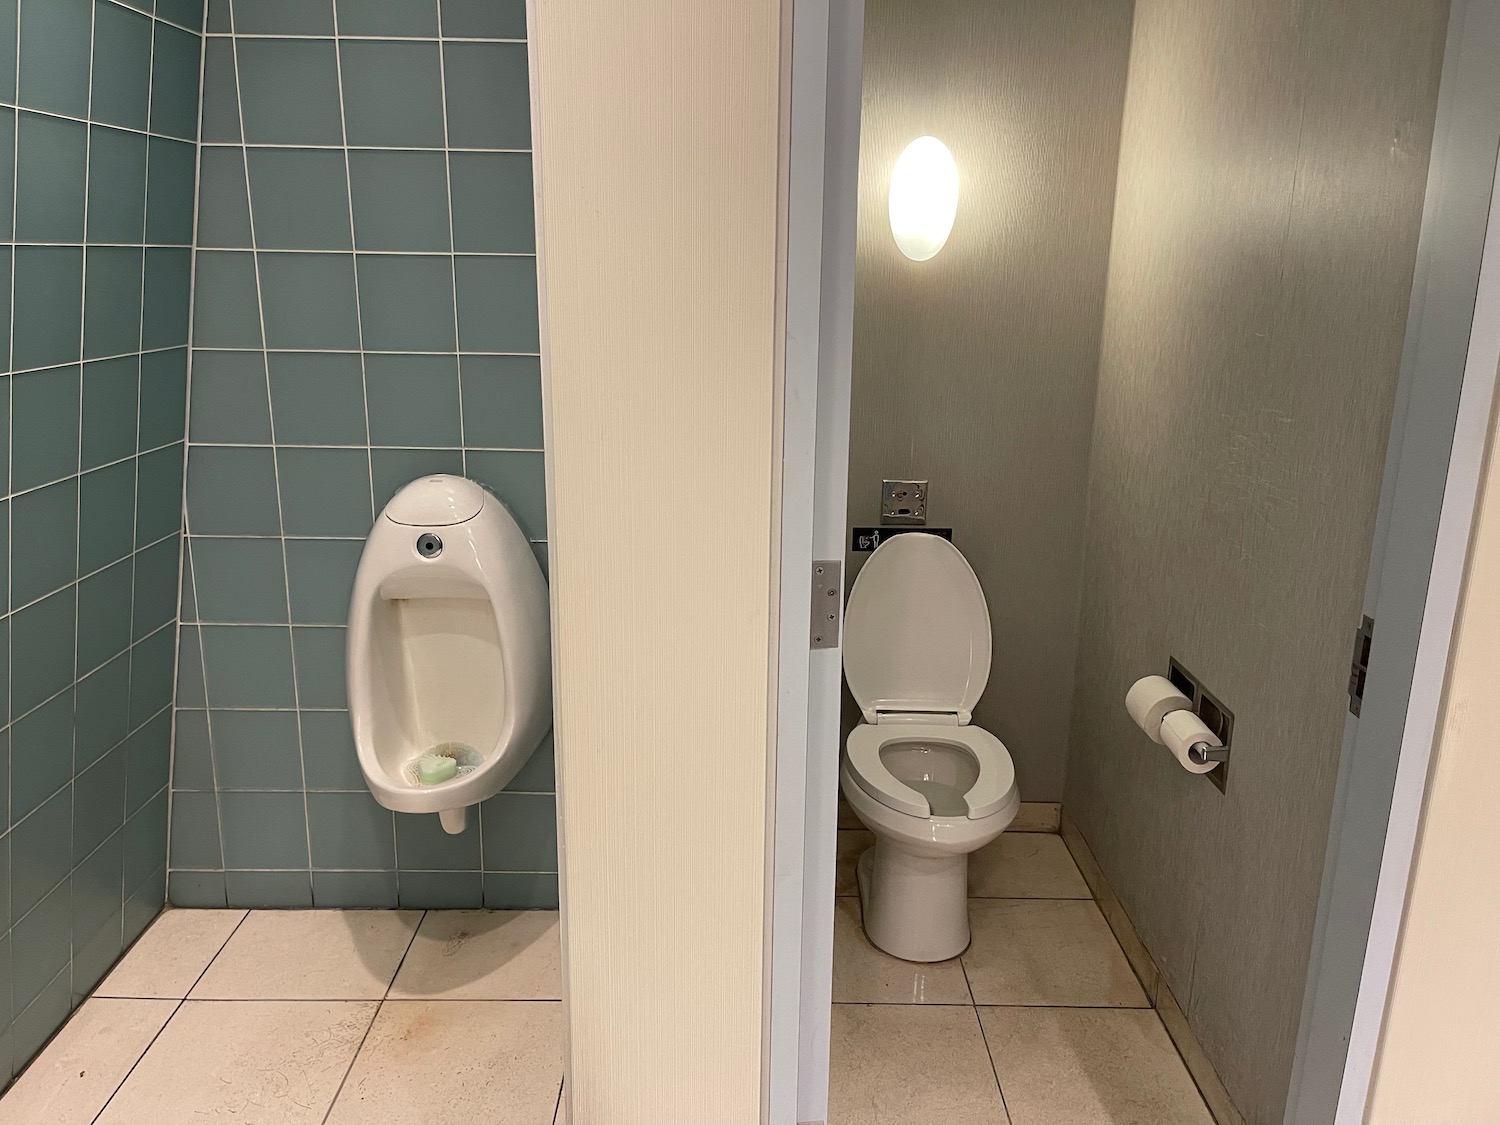 a bathroom with a urinal and a wall